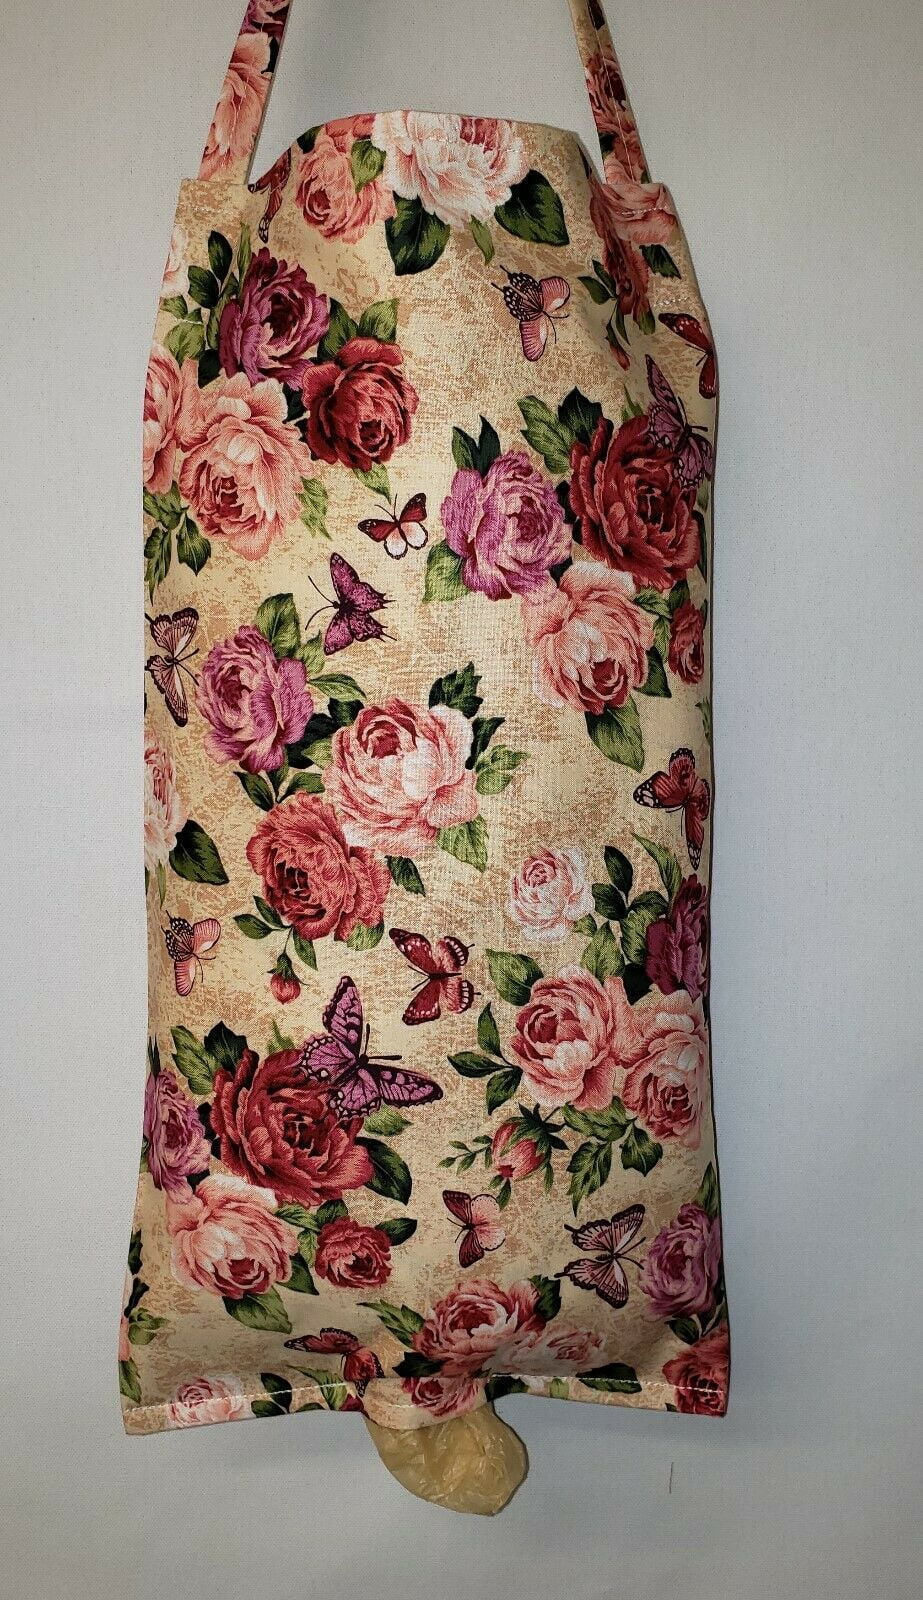 Roses & Butterflies Grocery Plastic Shopping Bag Holder by Penny&#39;s Needful Things - www.paulmartinsmith.com ...